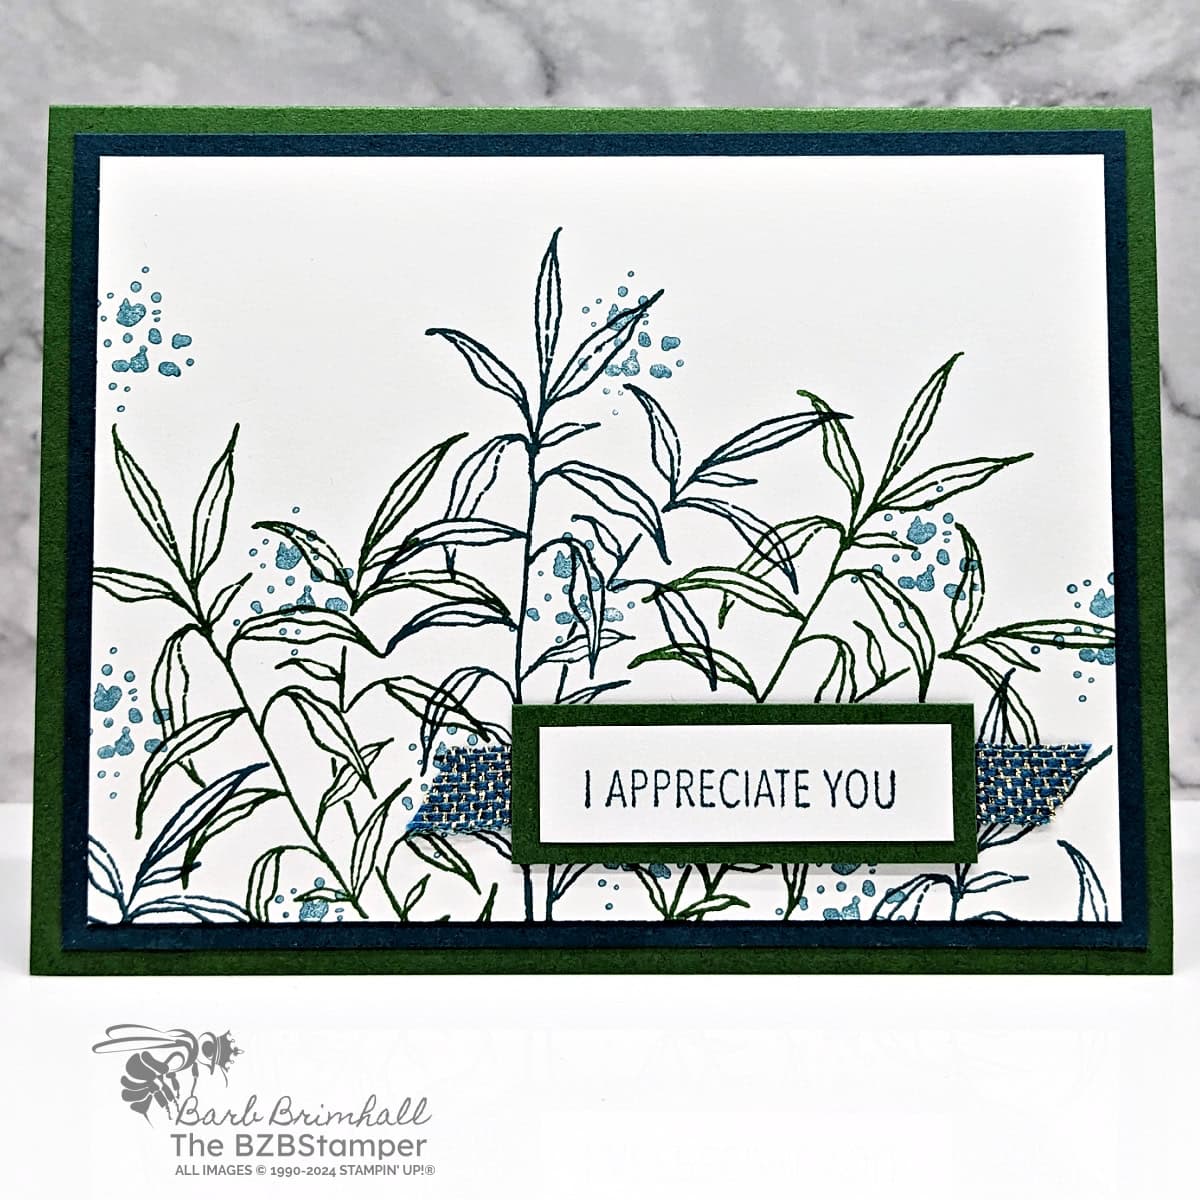 Easy Greeting Cards using the Thoughtful Wishes Stamp Set in Navy Blues and Greens, featuring an "I appreciate you" sentiment.